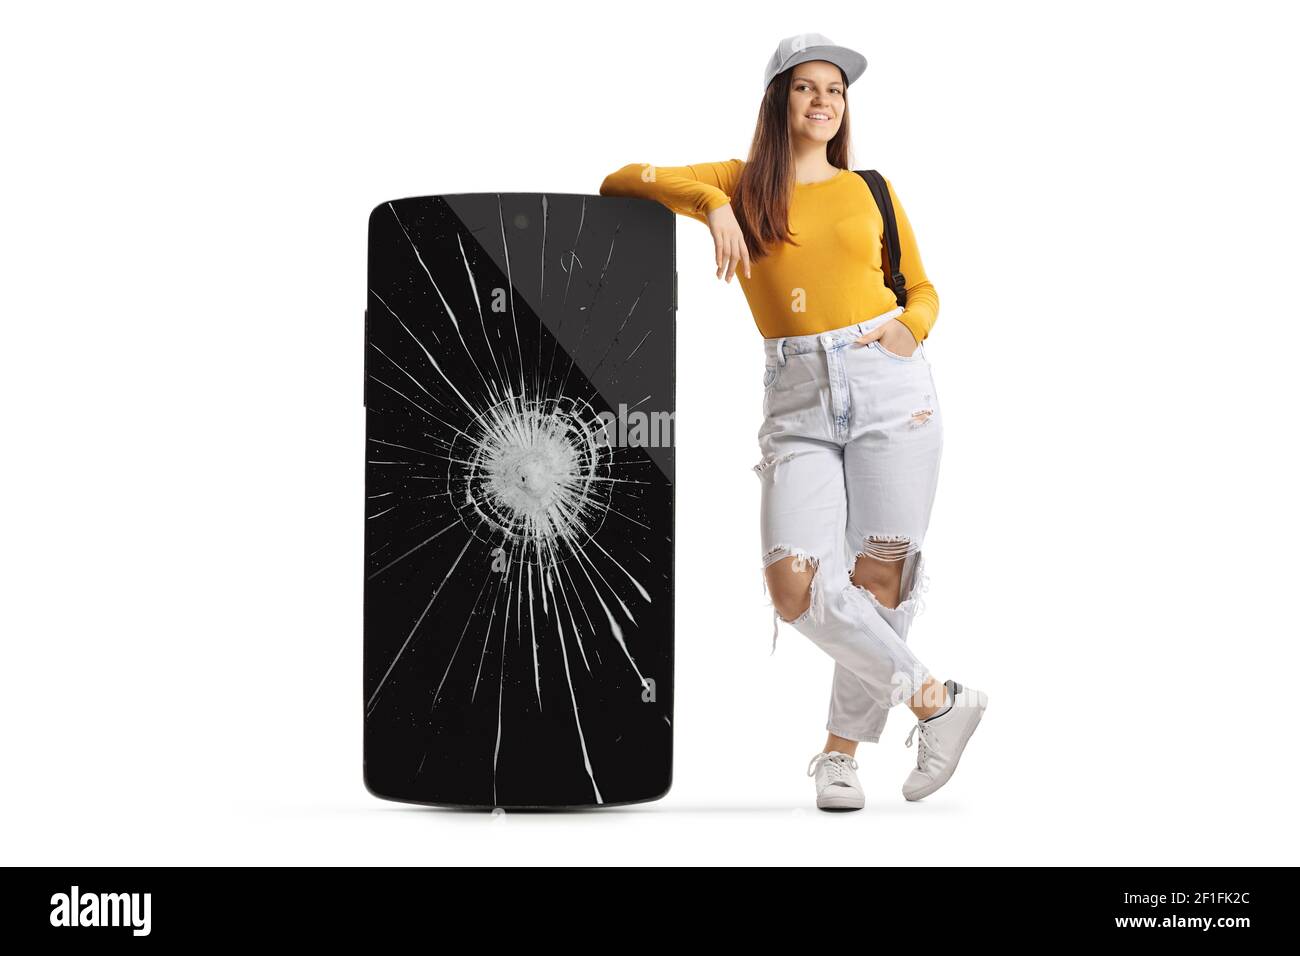 Full length portrait of a teenage girl leaning on a phone with a cracked screen isolated on white background Stock Photo